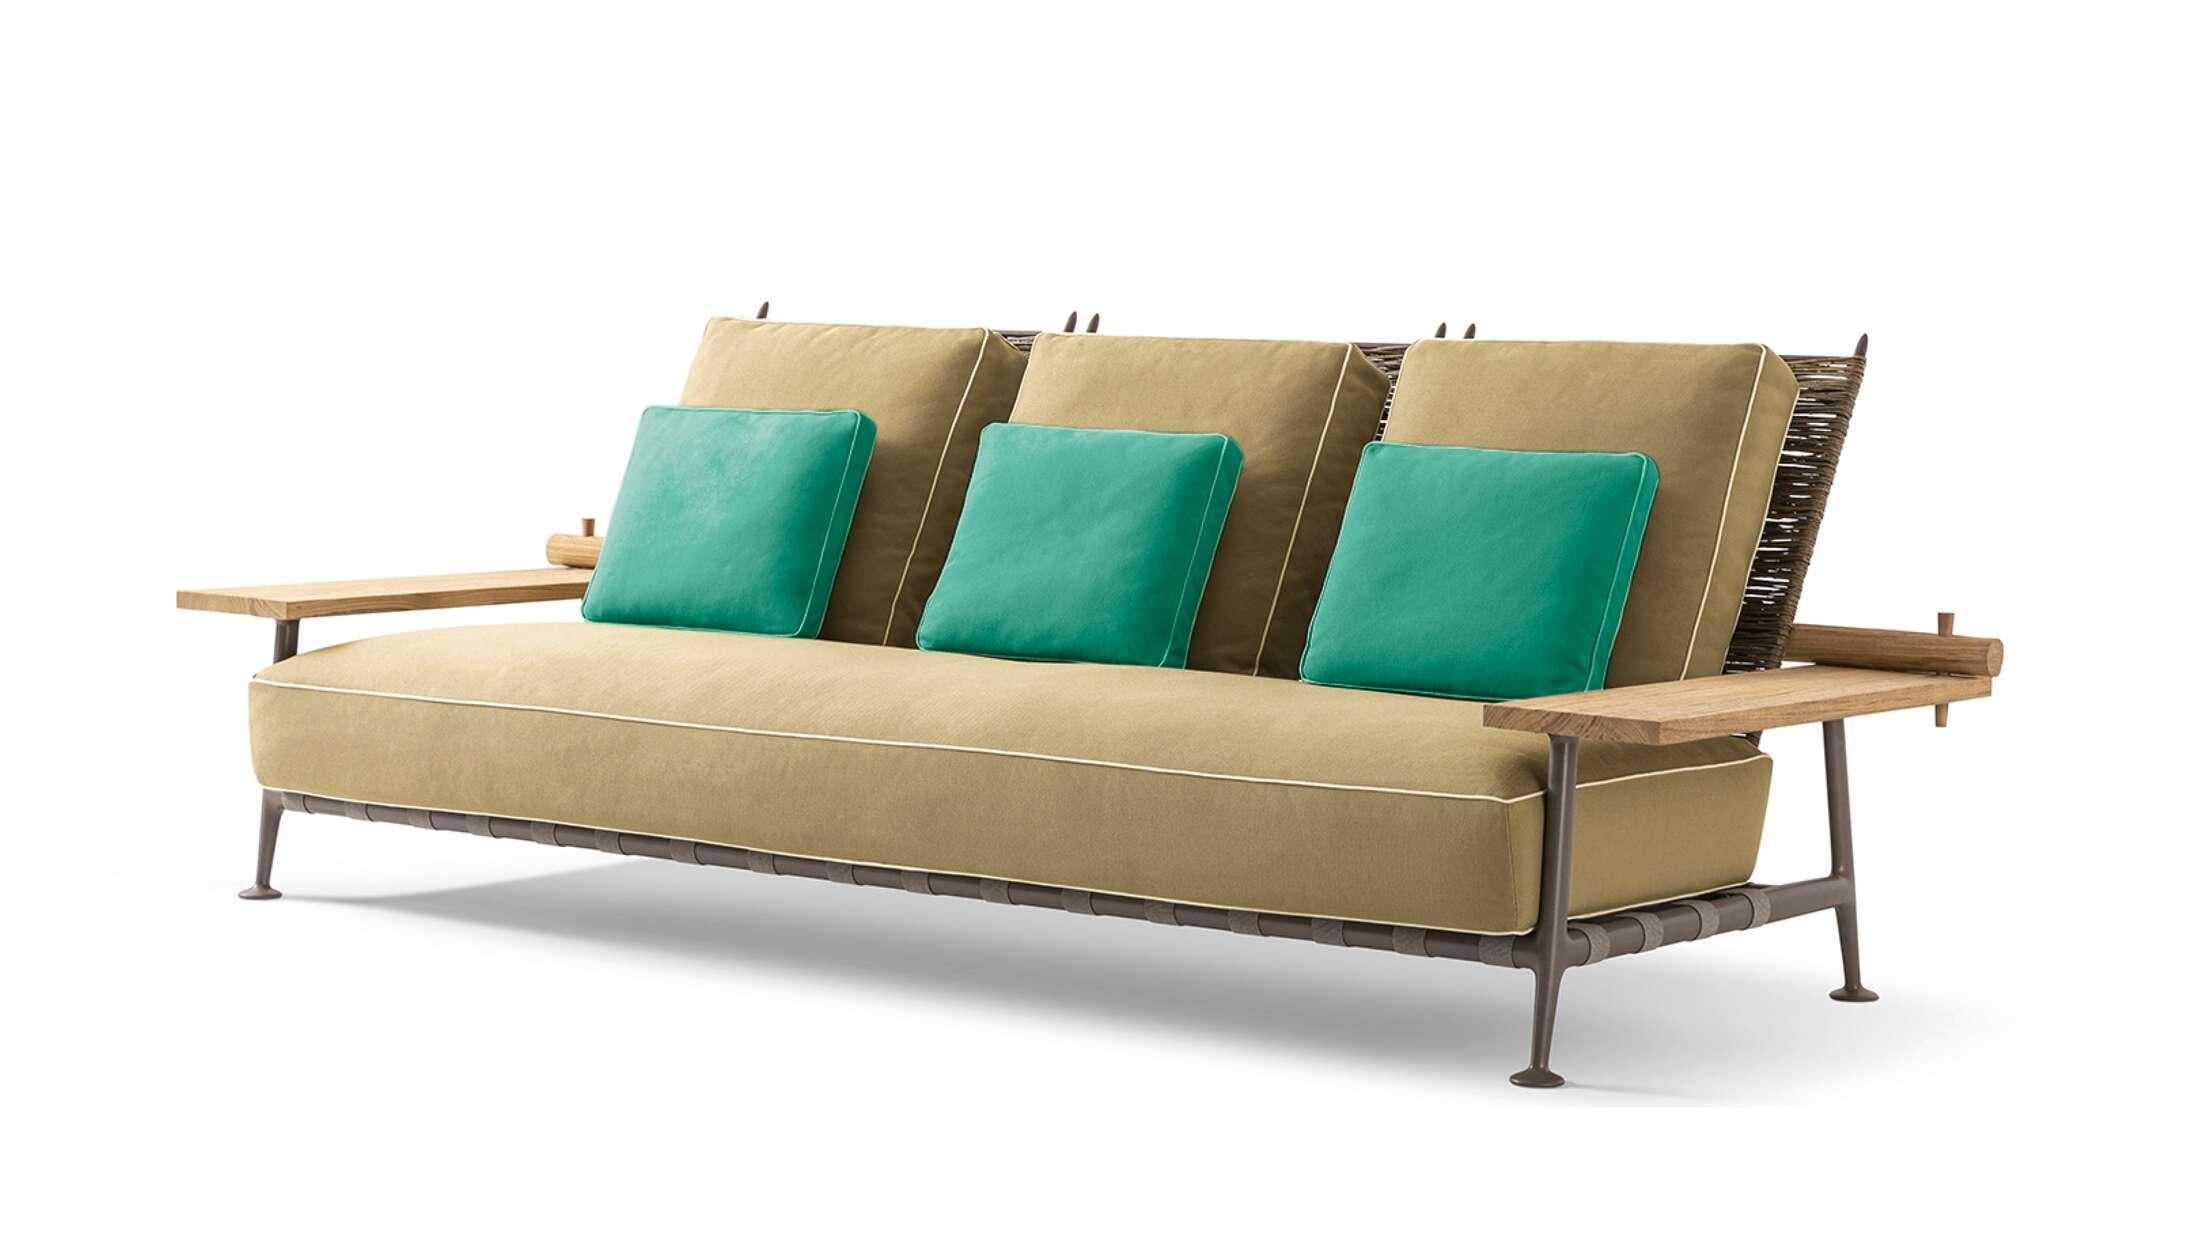 Steel Philippe Starck 'Fenc-e-Nature' Outdoor Sofa for Cassina, Italy, new For Sale